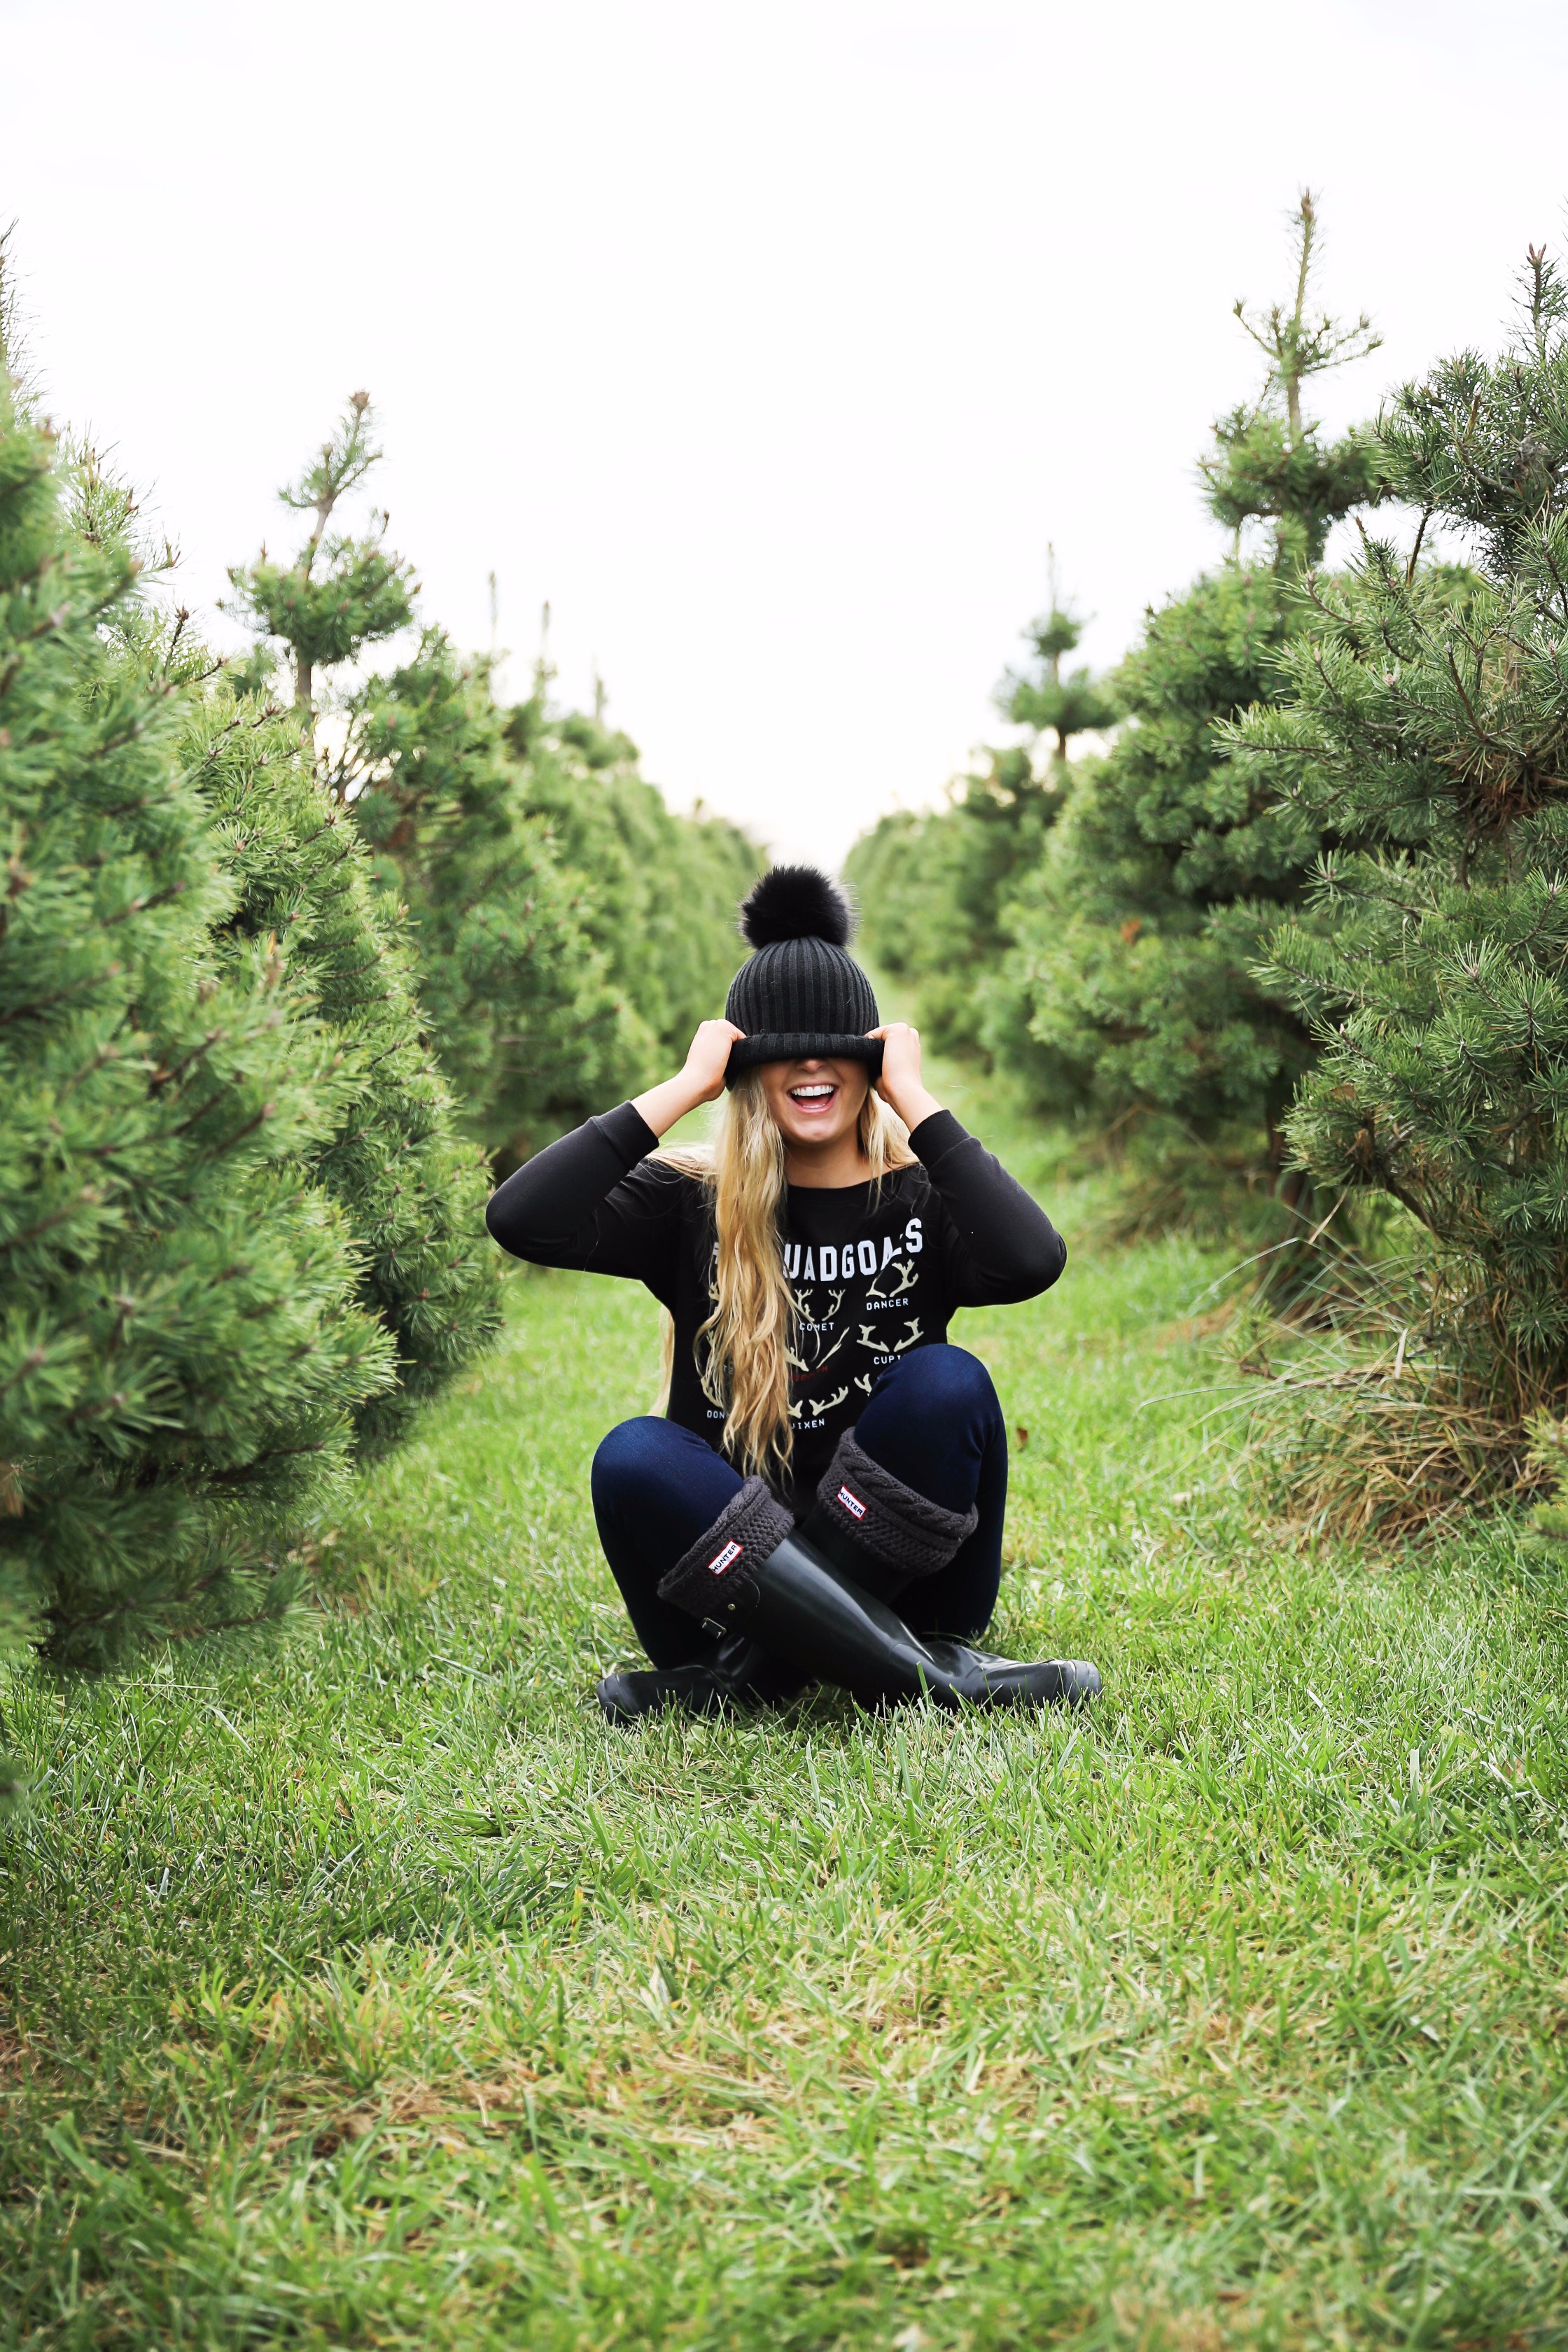 Christmas tree farm outfit idea! Squad goals with the reindeers shirt! Details on fashion blog daily dose of charm by lauren lindmark